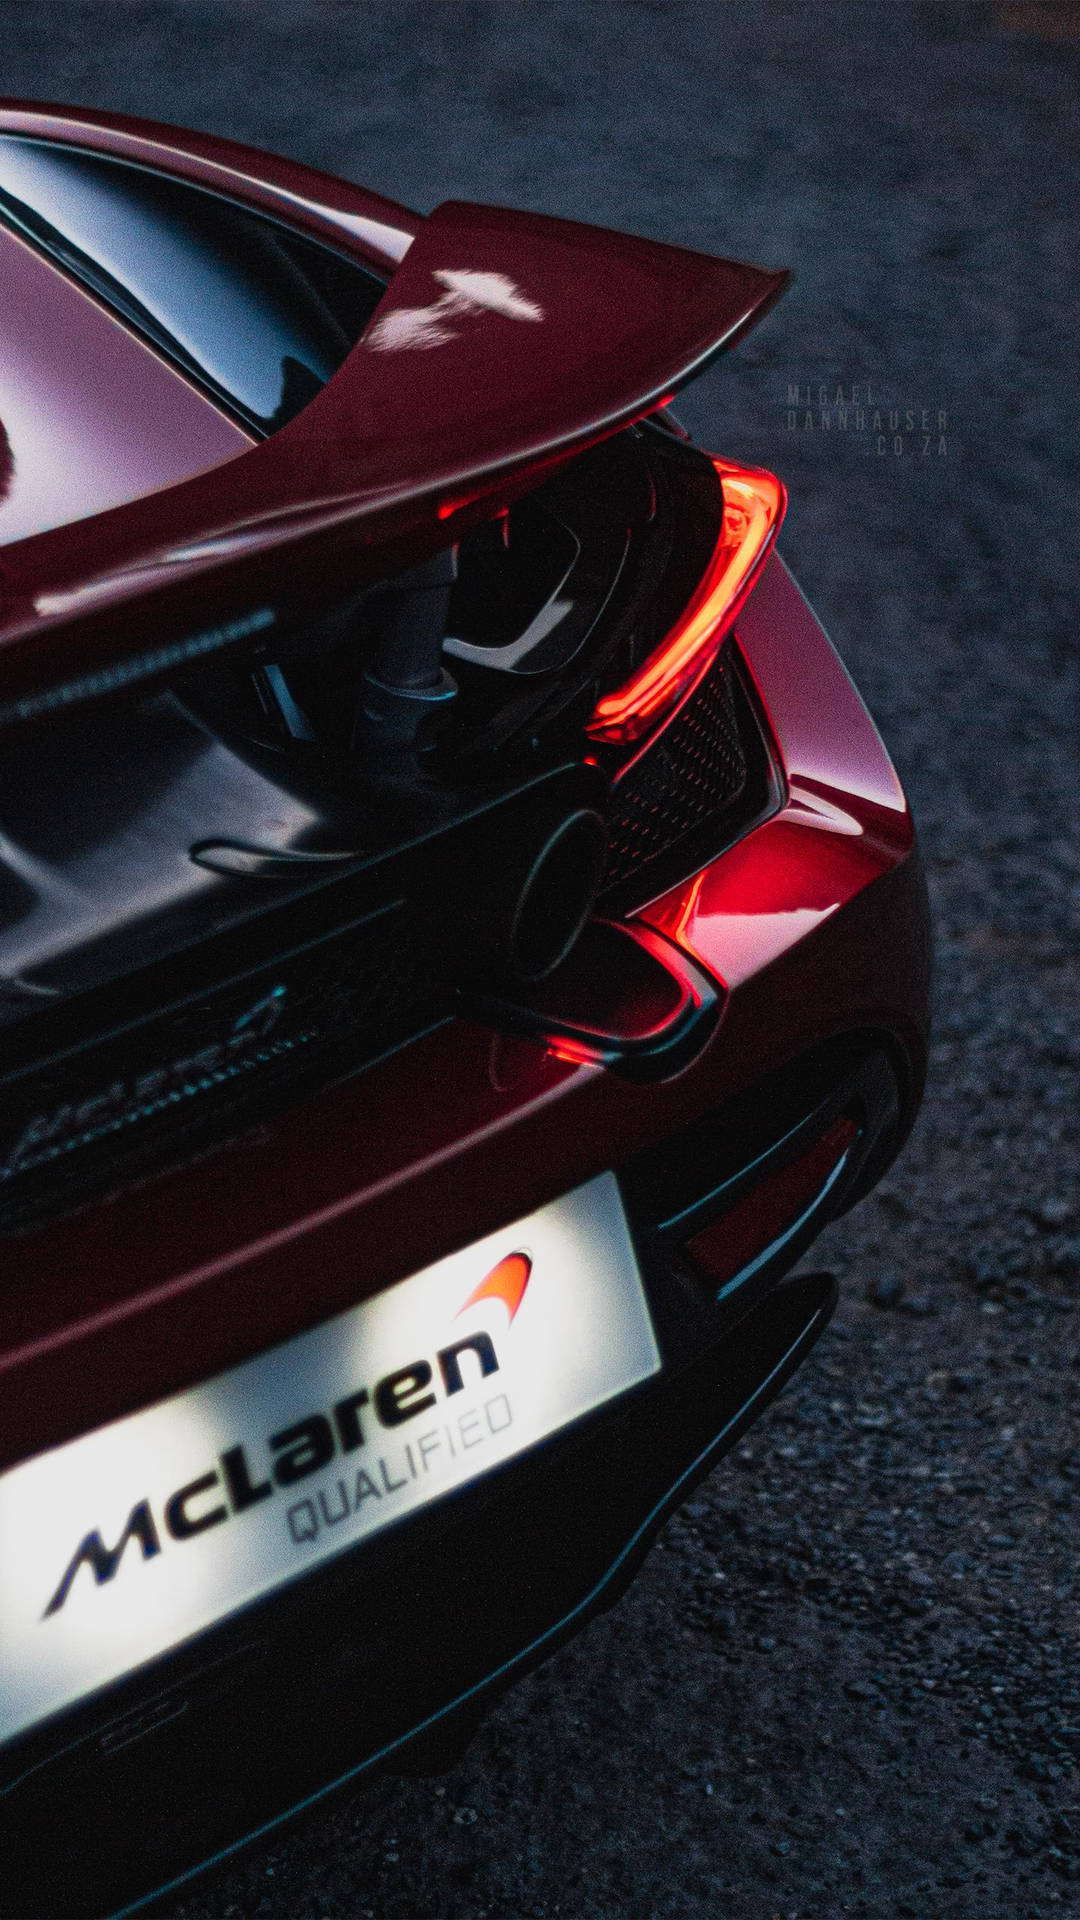 Mclaren 720s Phone Trunk And Plate Background